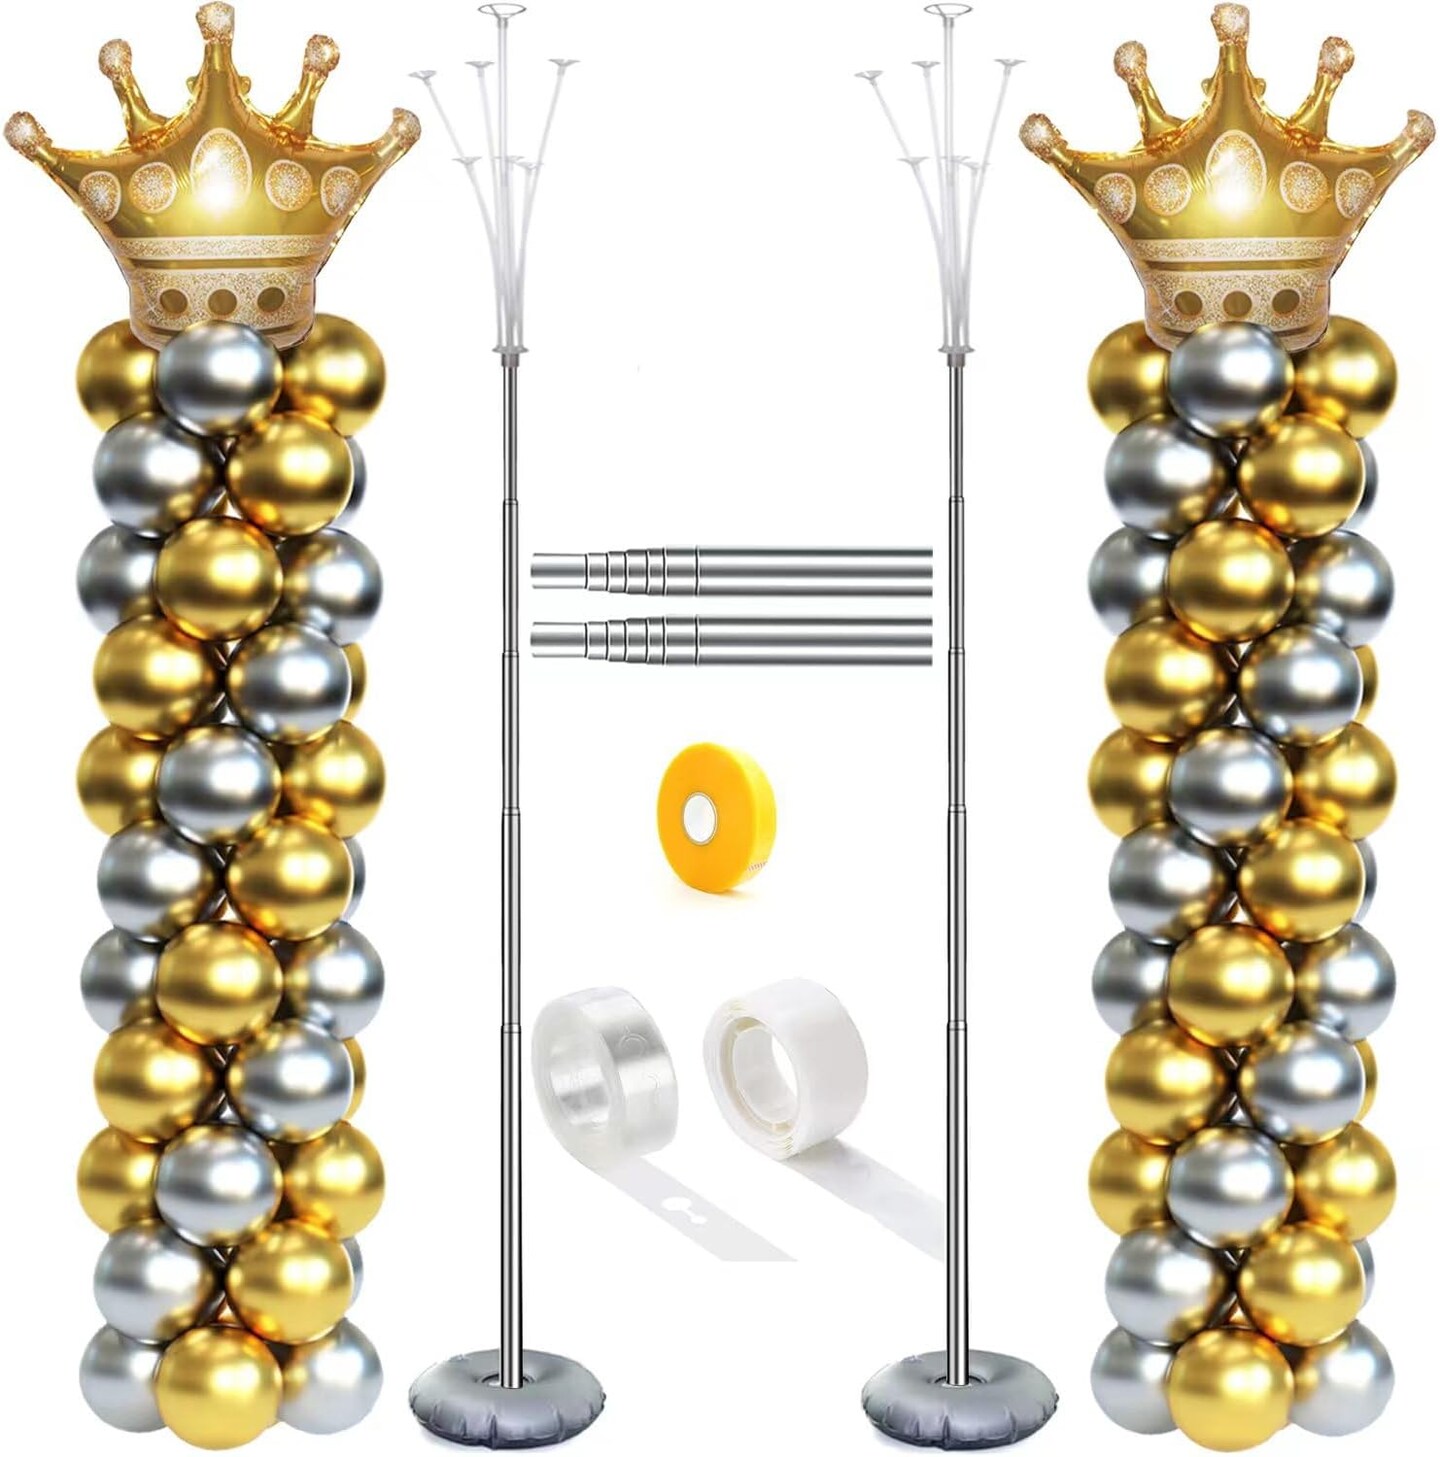 Balloon Stand Kit, 9 Feet Balloon Arch for Floor, 2IN1 Sets Ballon Column Holder with Weights Base and Stick, Metal Backdrop Stands for Parties, NO Need Helium Tank for Balloons at Home